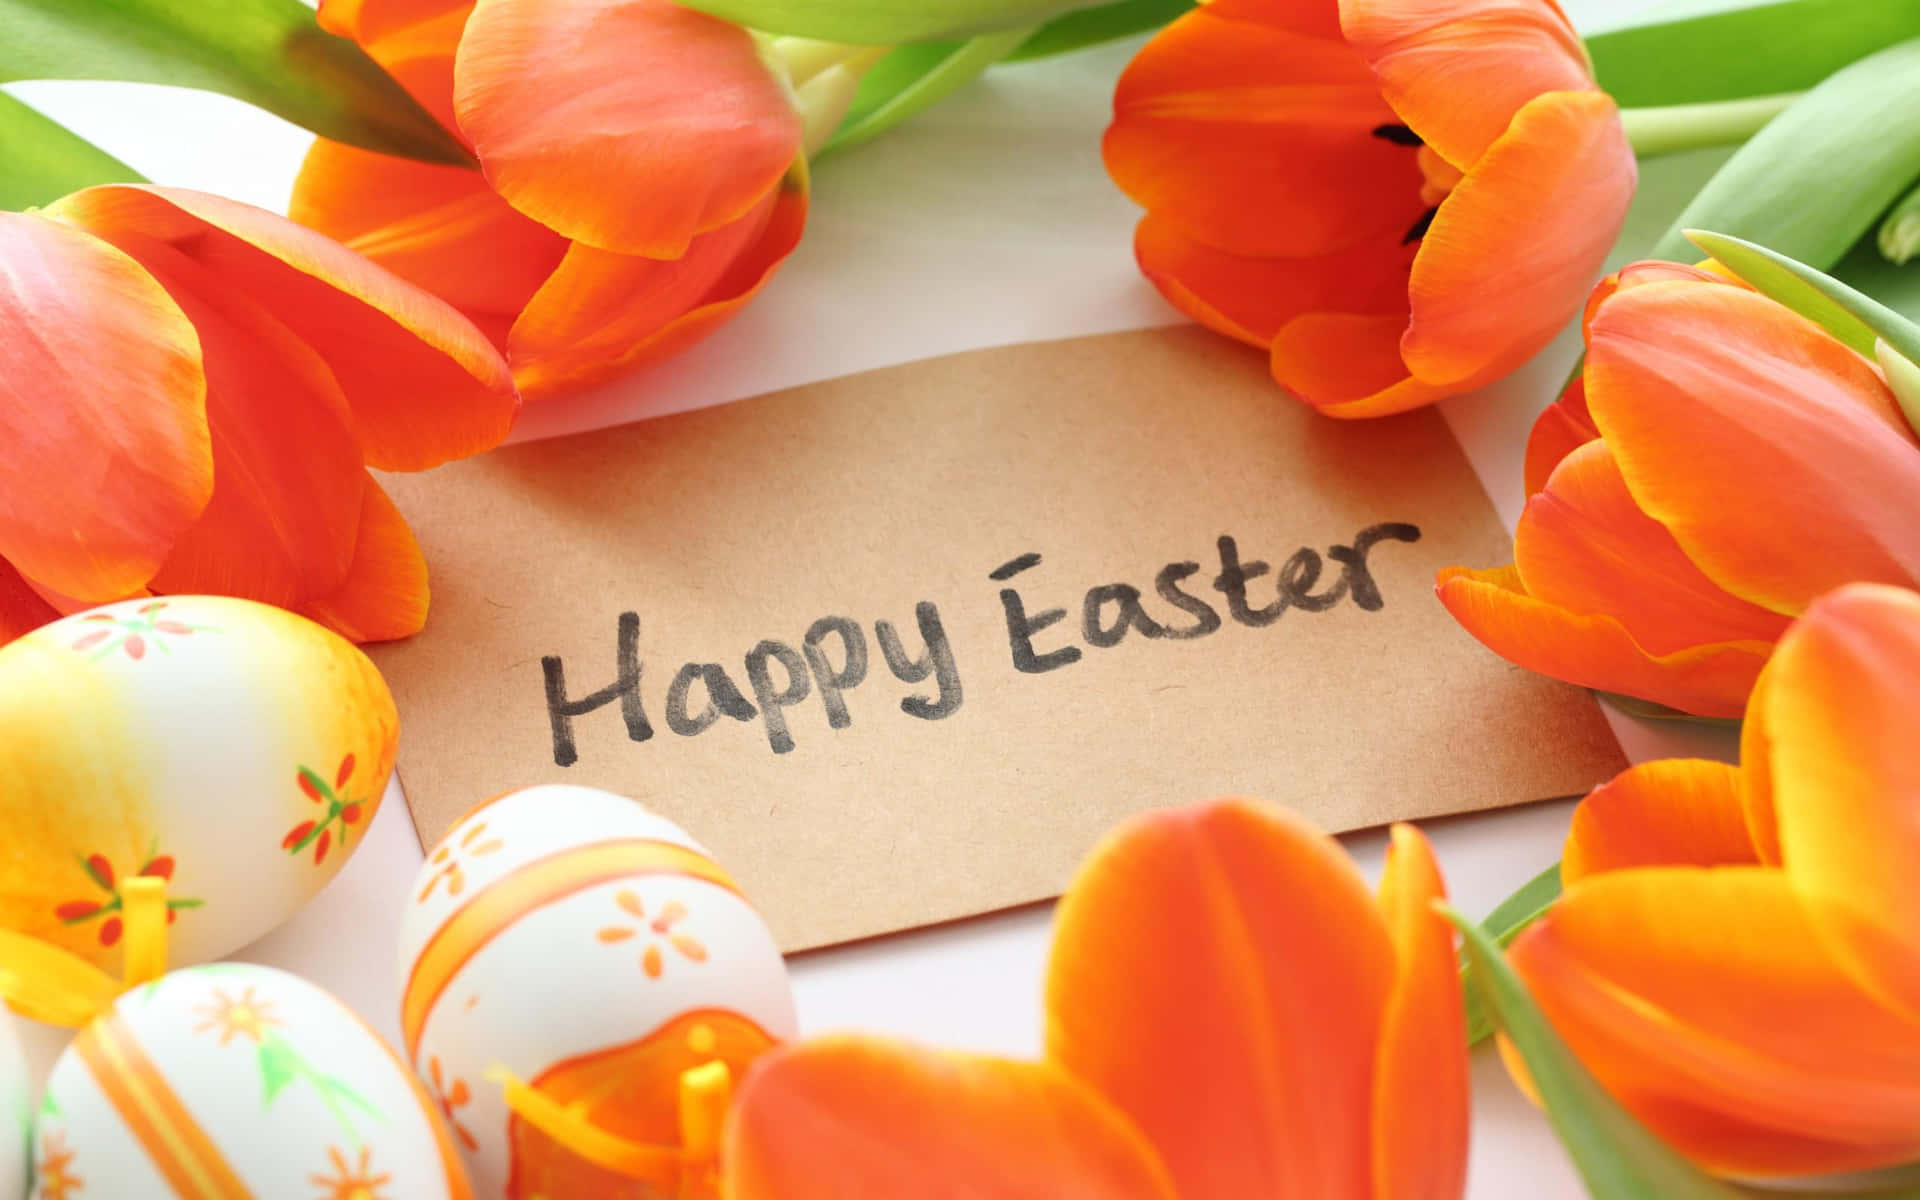 Wishing you a very Happy Easter!